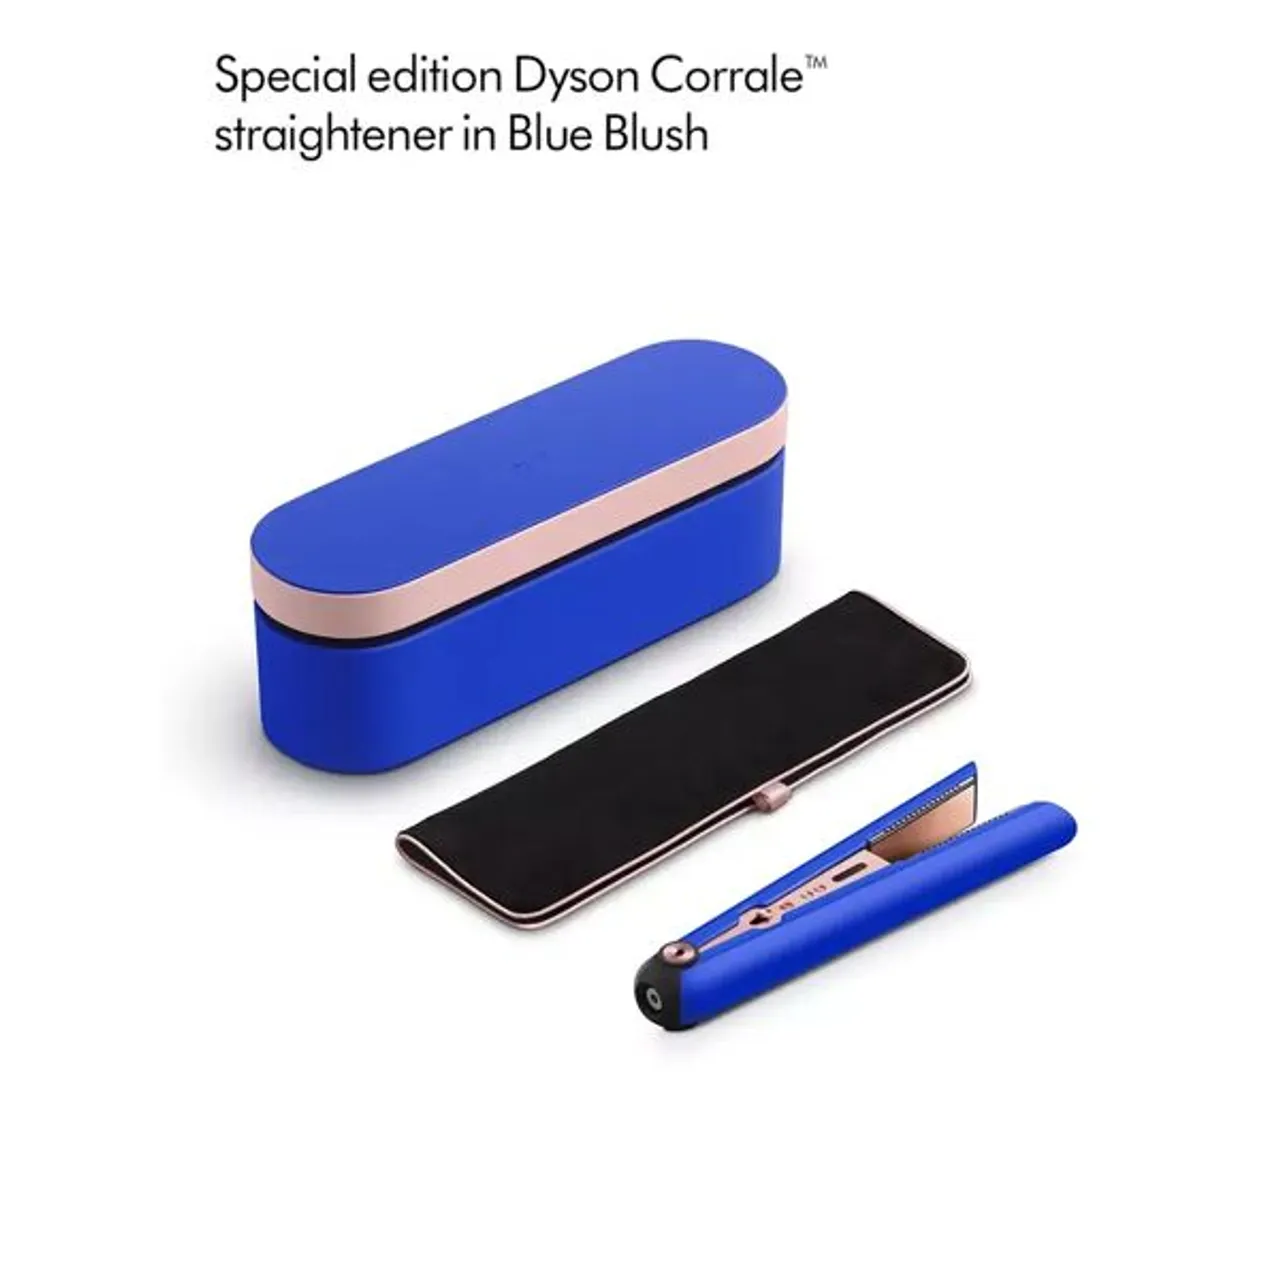 Dyson Corrale Hair Straightener with Complimentary Gift Case, Blue Blush - Blue/Blush - Unisex